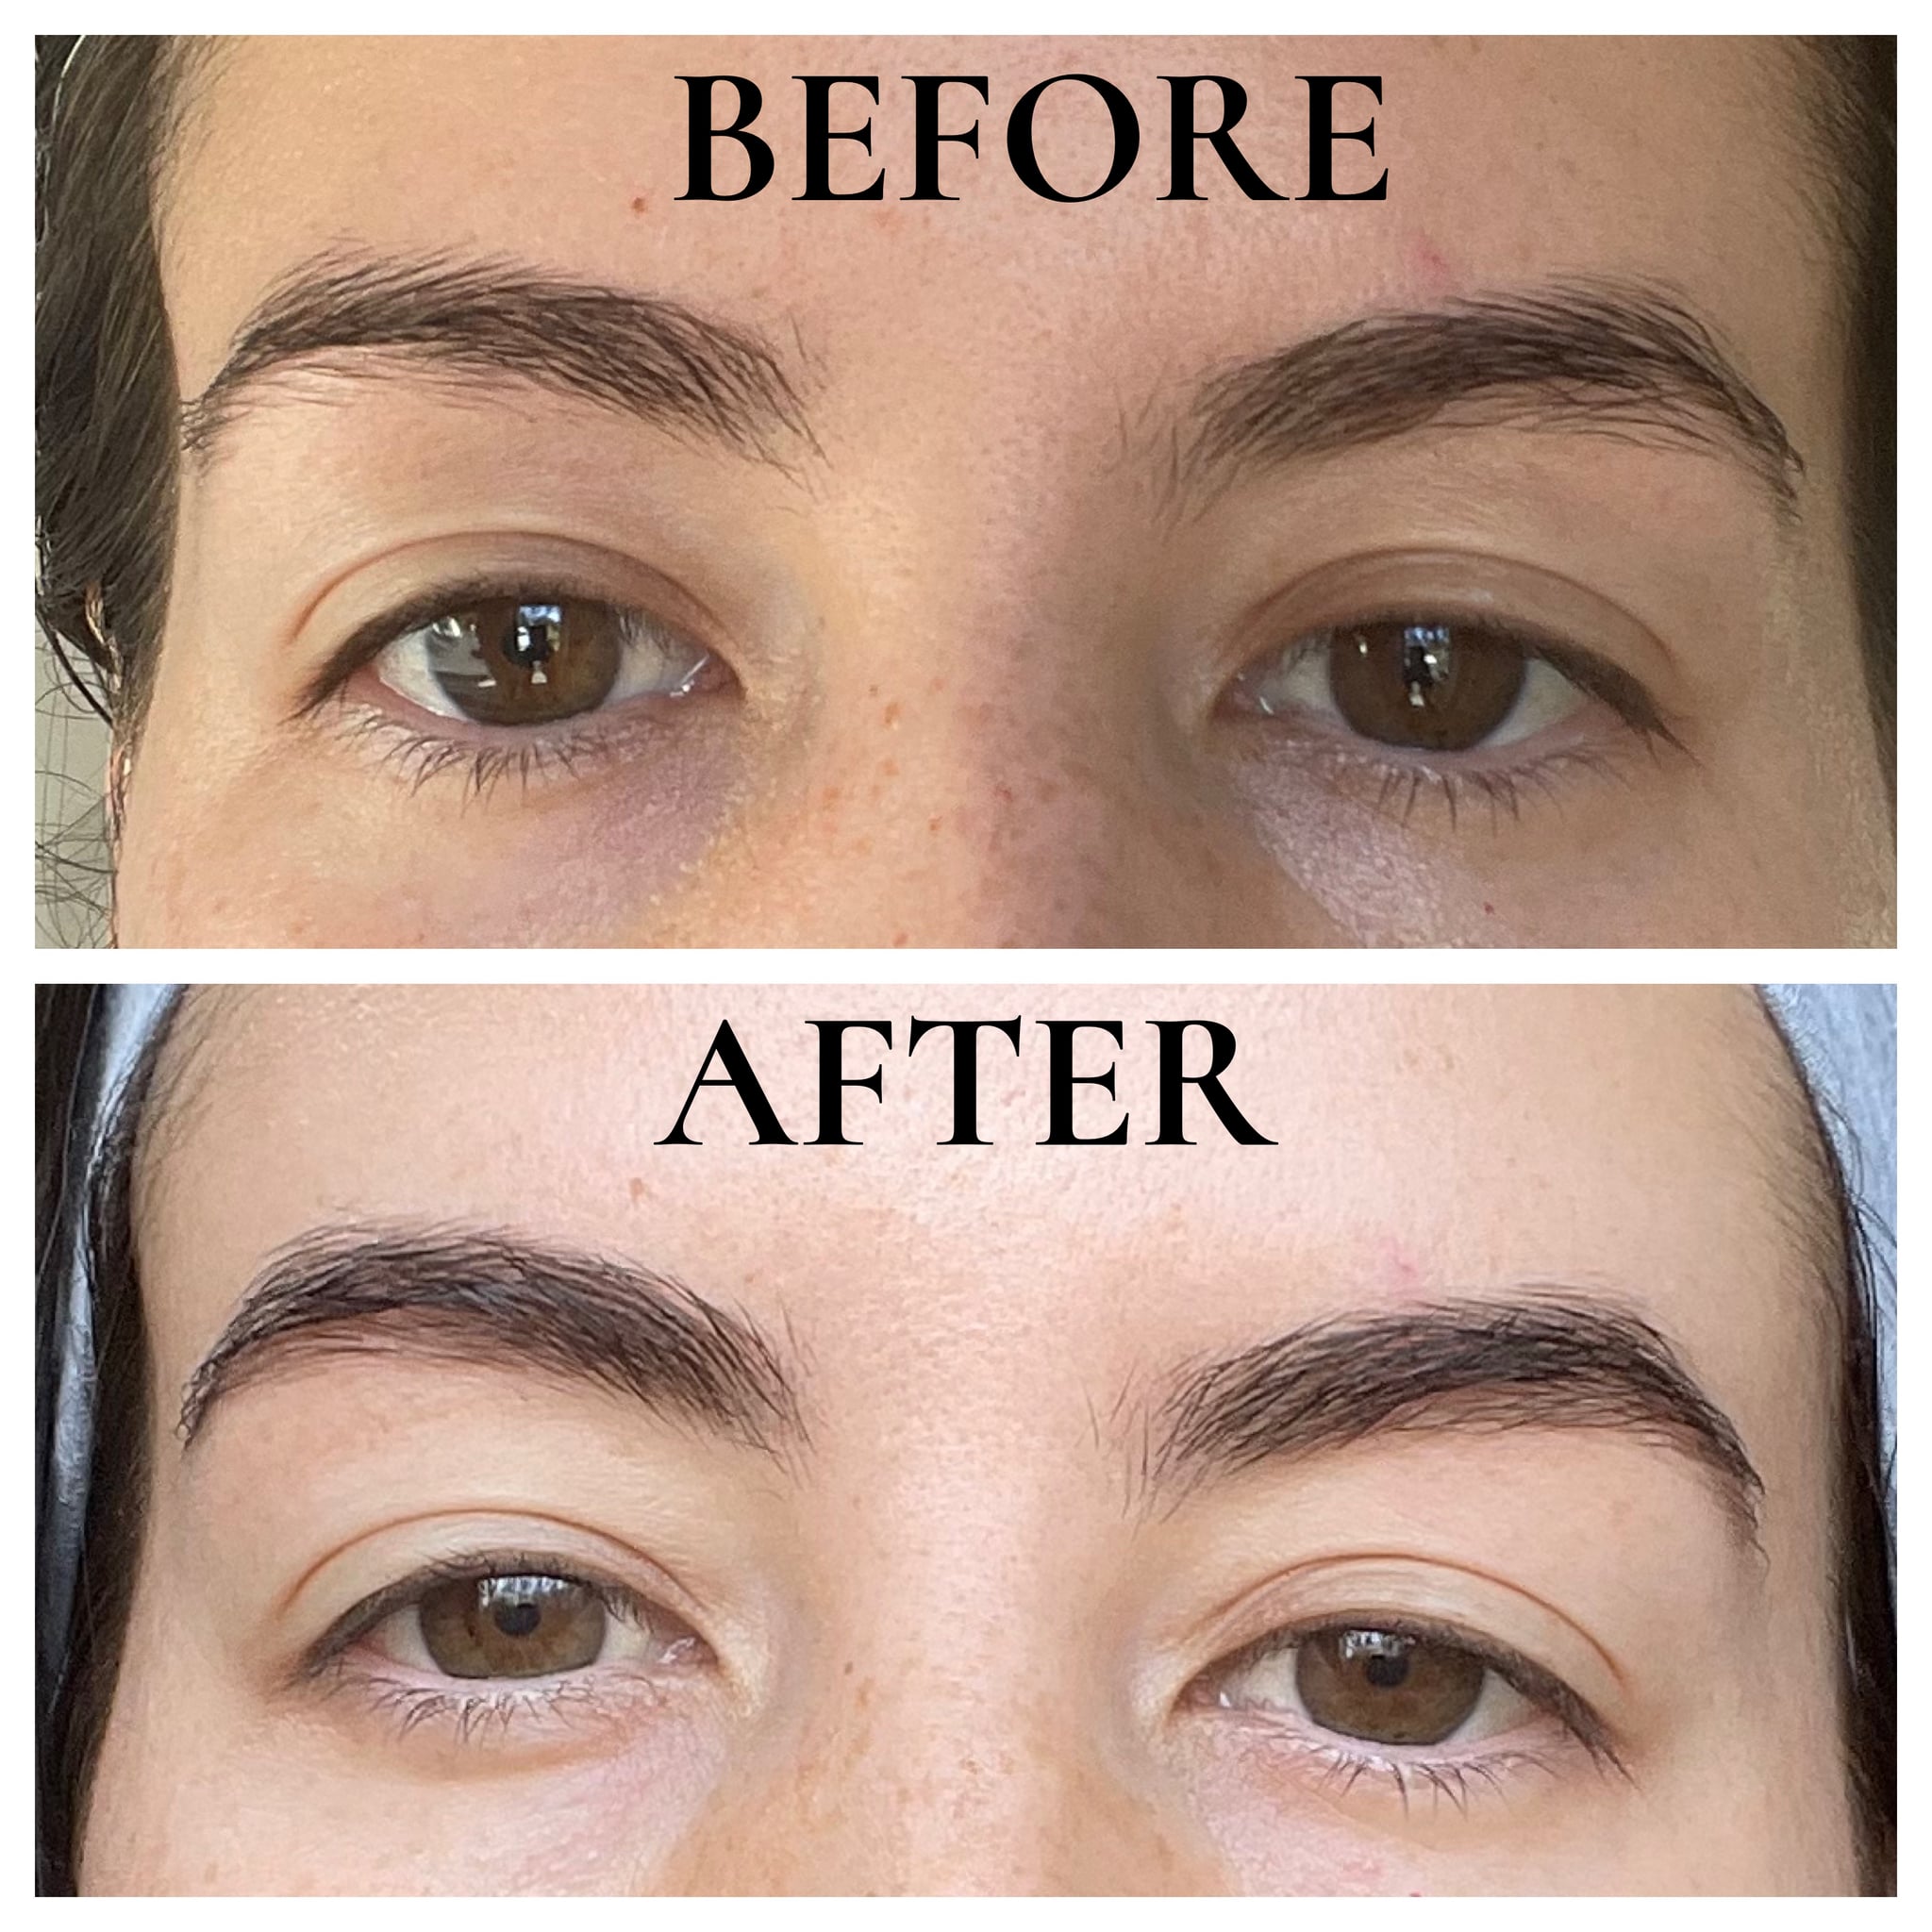 How to tint brows at home with Brow Code Tint Kit according to a pro